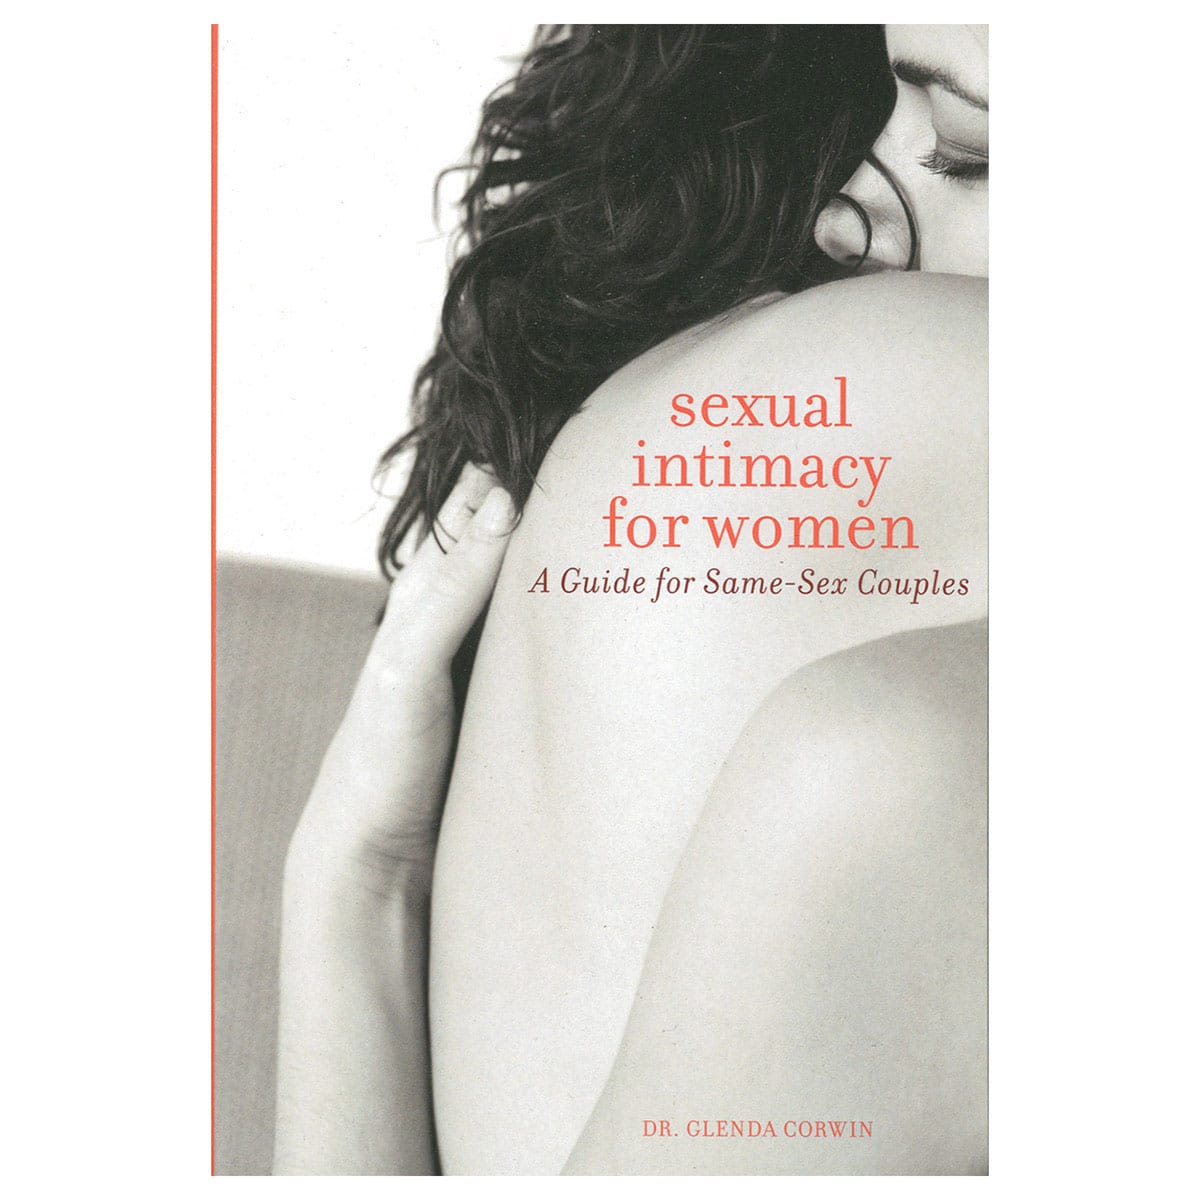 Buy A Guide for Same Sex Couples Sexual Intimacy for Women book for her.